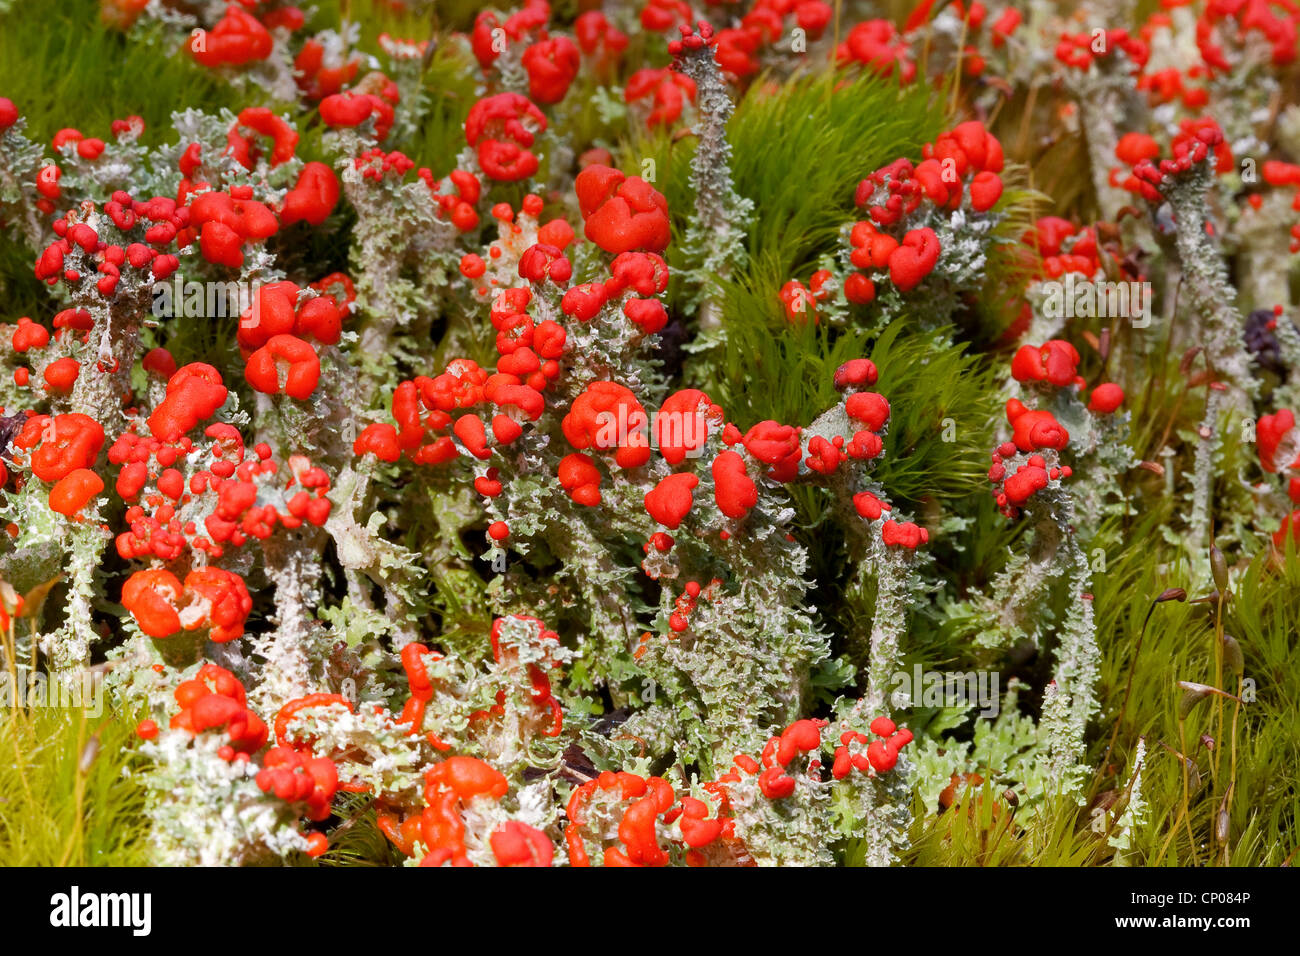 Red Pixie Cup (Cladonia coccifera, Cladonia cornucopioides), with red fruiting bodies, Germany Stock Photo